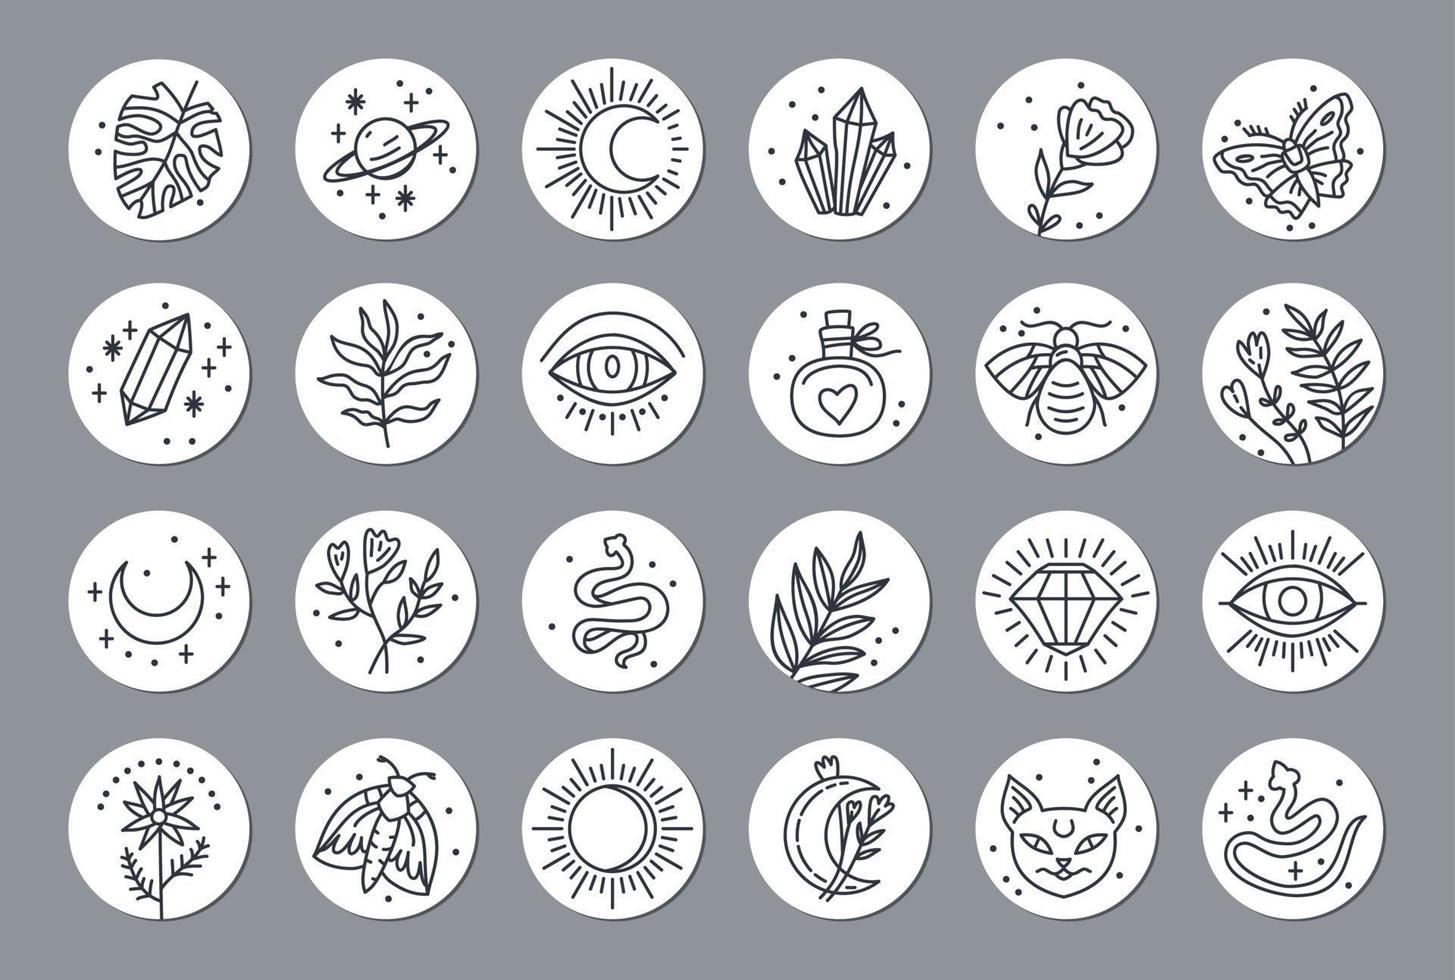 Set of various vector highlight covers with mystical boho elements